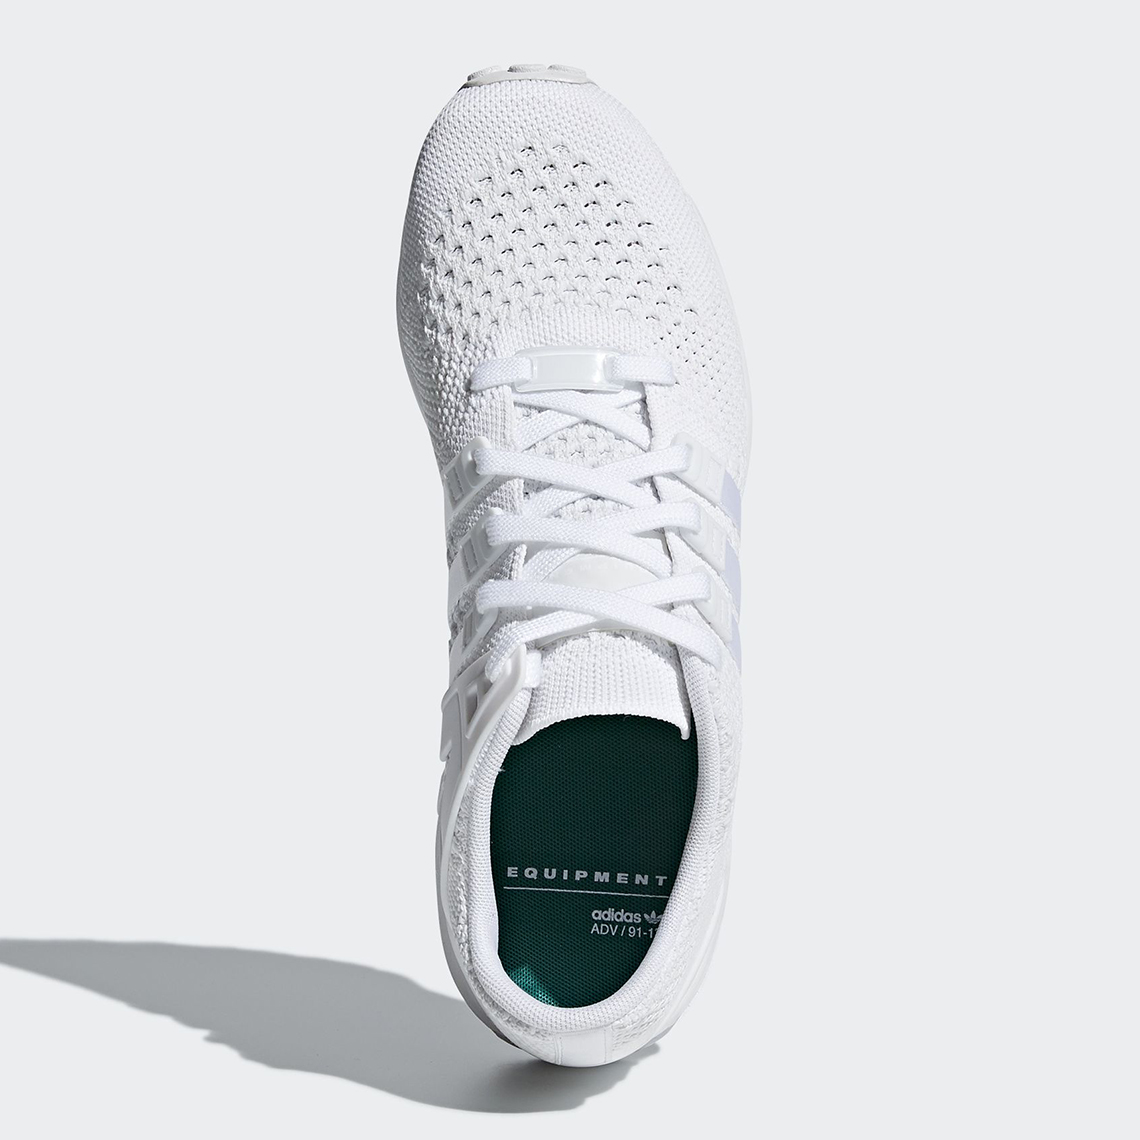 Adidas Eqt Support Rf Pk Cq3044 Triple White Available Now 1